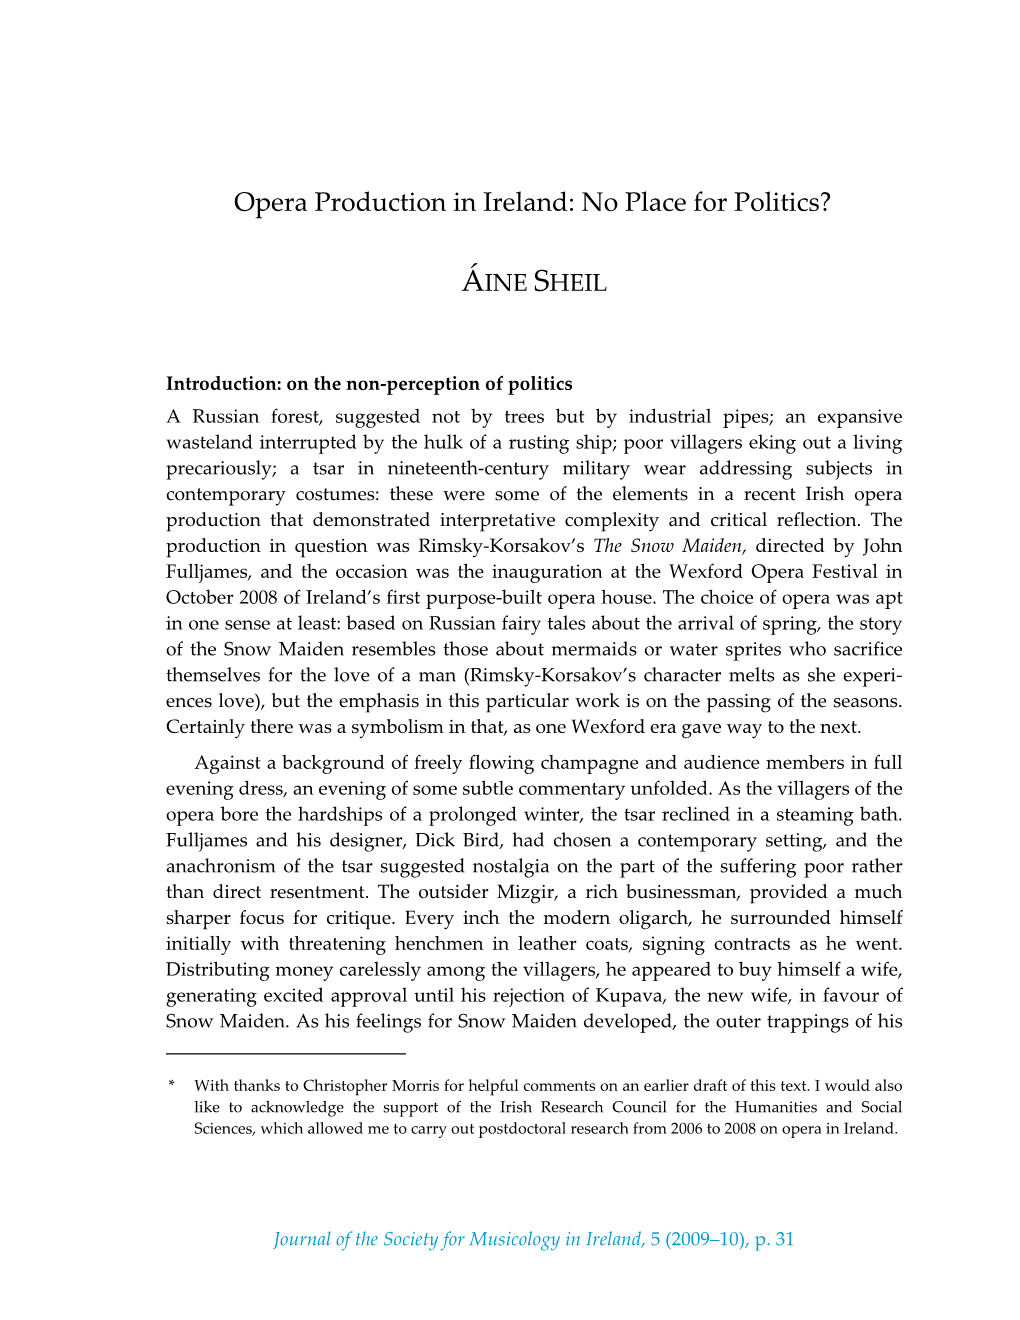 Opera Production in Ireland: No Place for Politics?